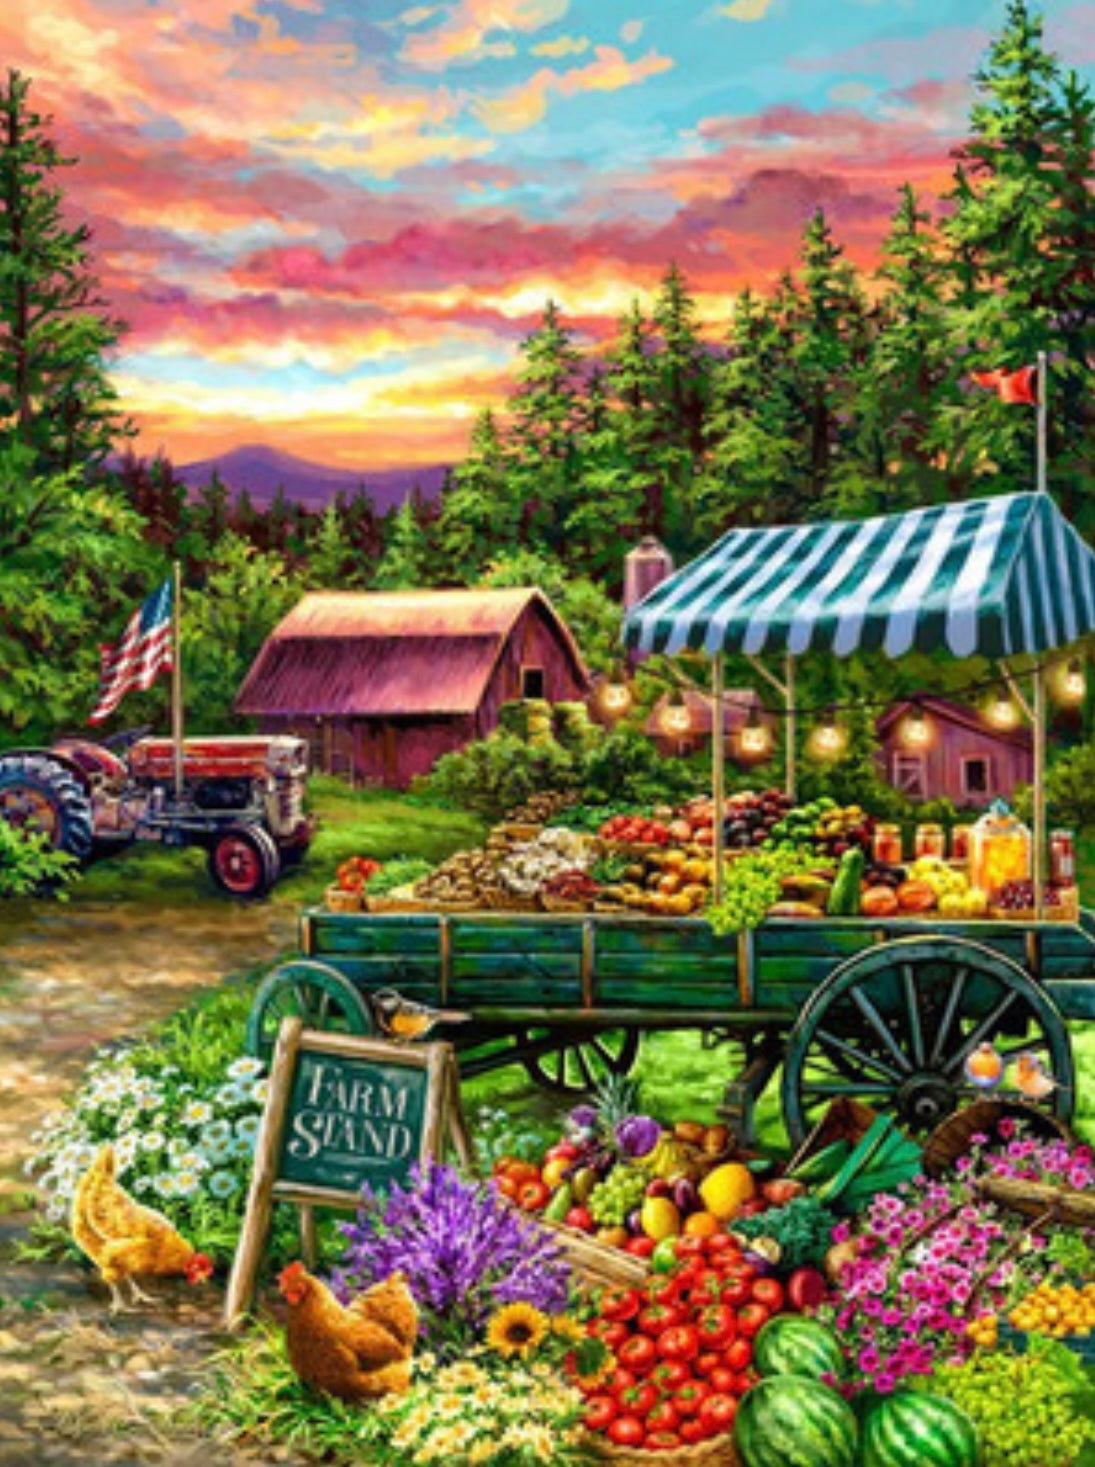 Springbok The Fruit Stand 500 pc Puzzle